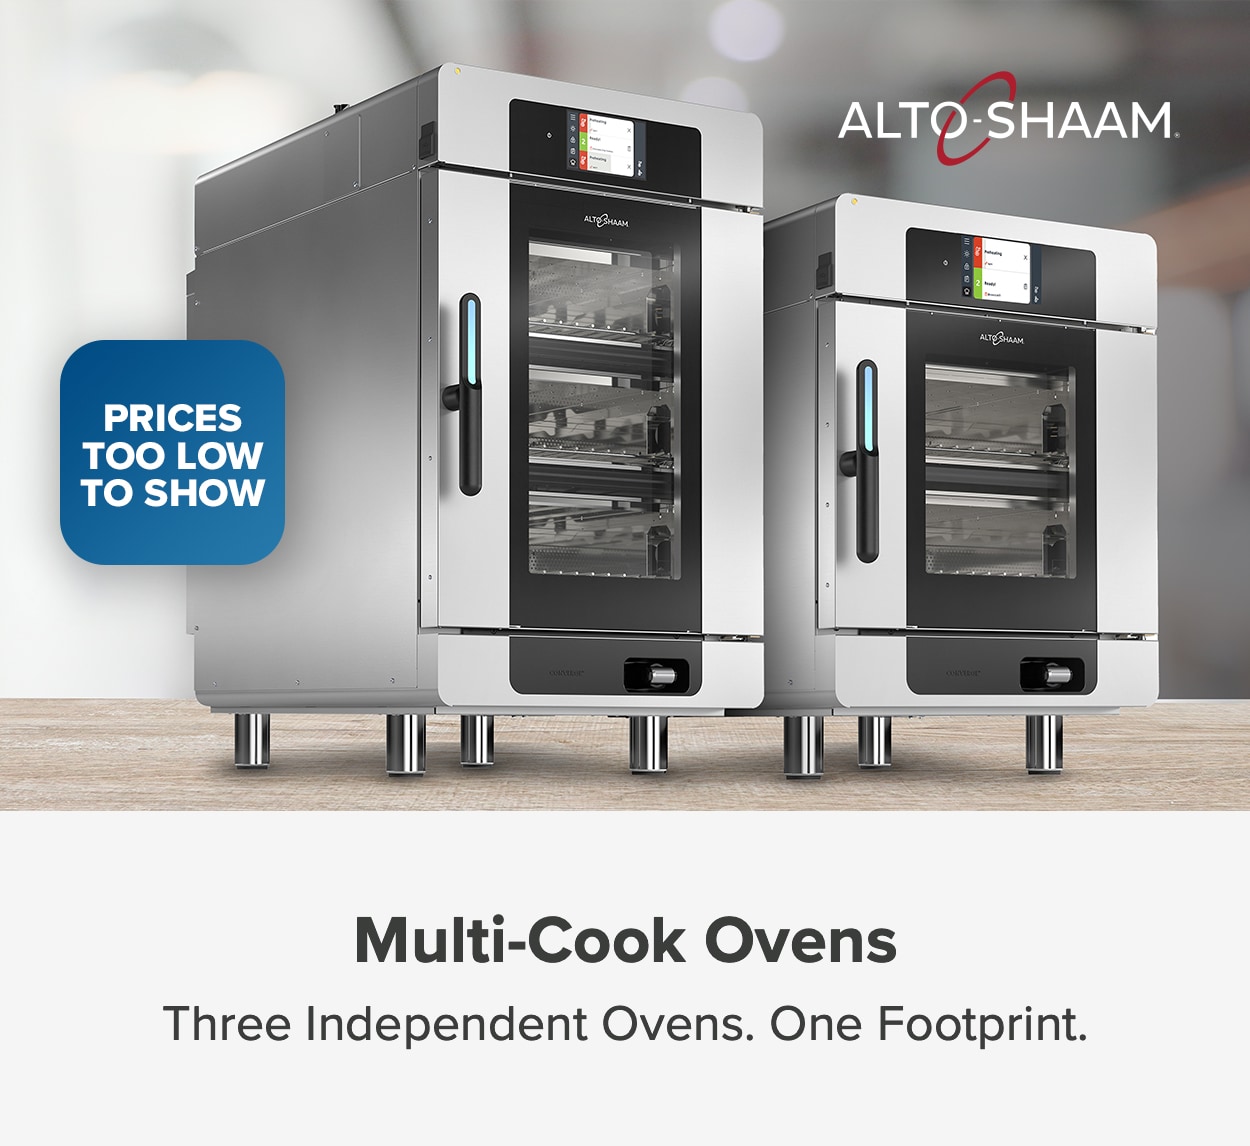 Don't Miss These Great Prices on Alto-Shaam Multi-Cook Ovens